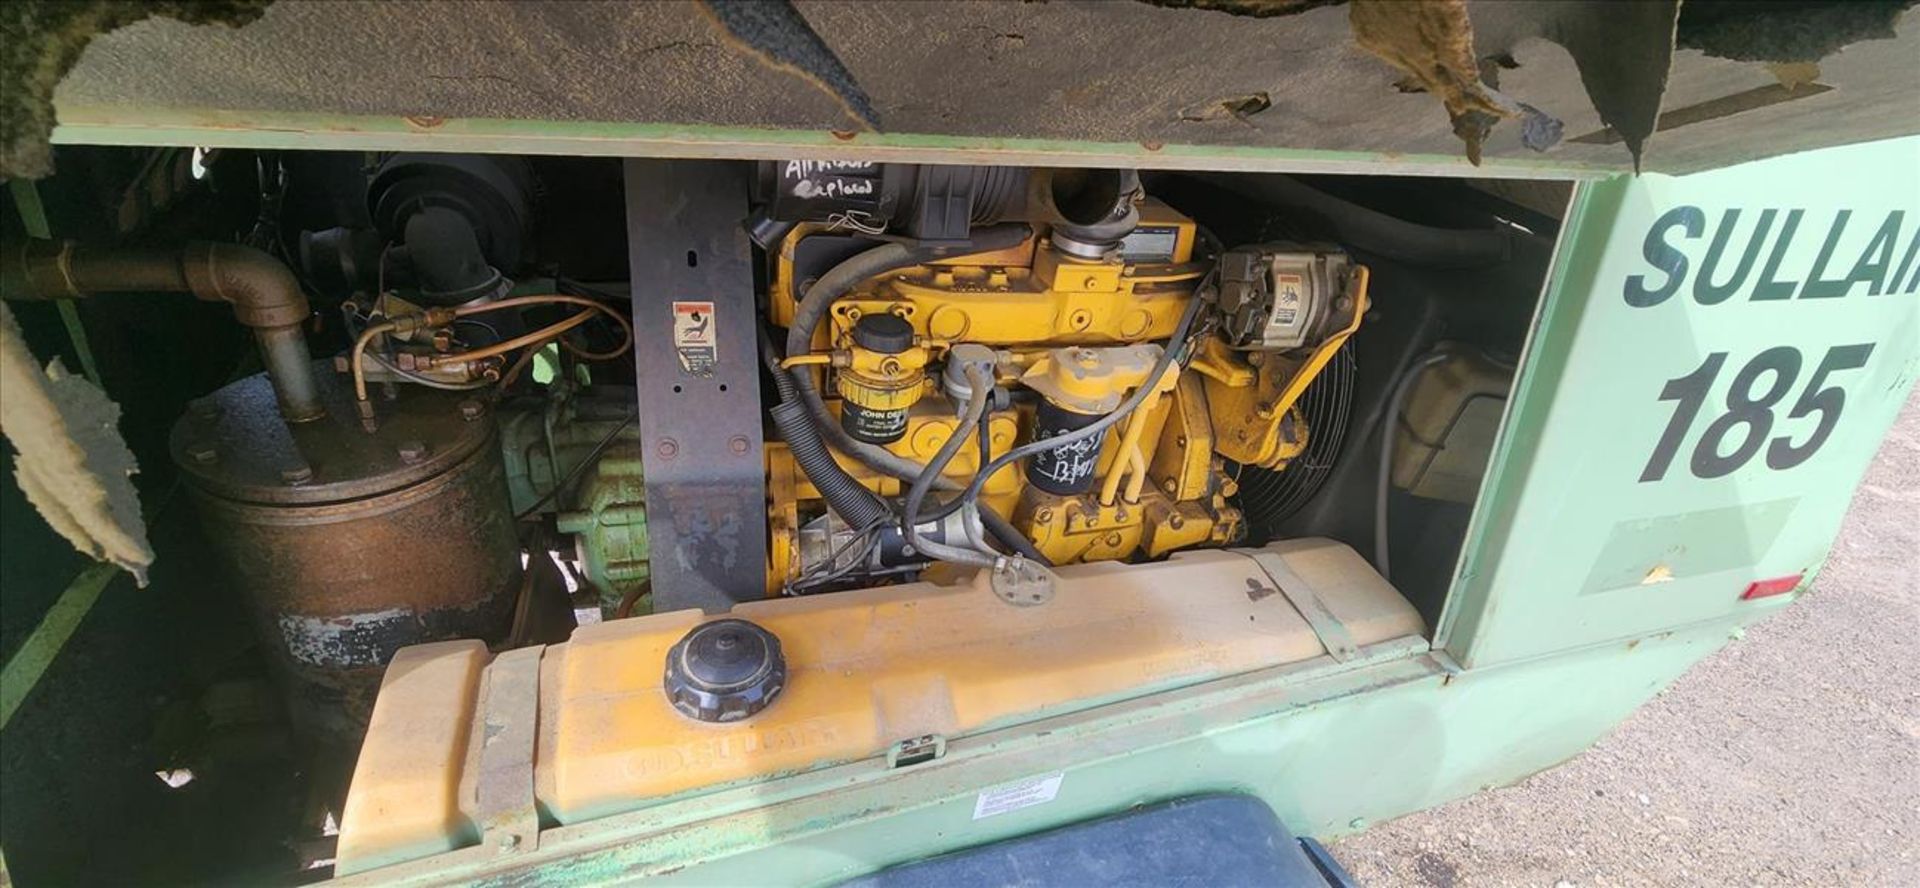 Sullair air compressor, mod. 185 DPQJD, ser. no. 004-134214, towable, JohnDeere diesel eng., approx. - Image 5 of 6